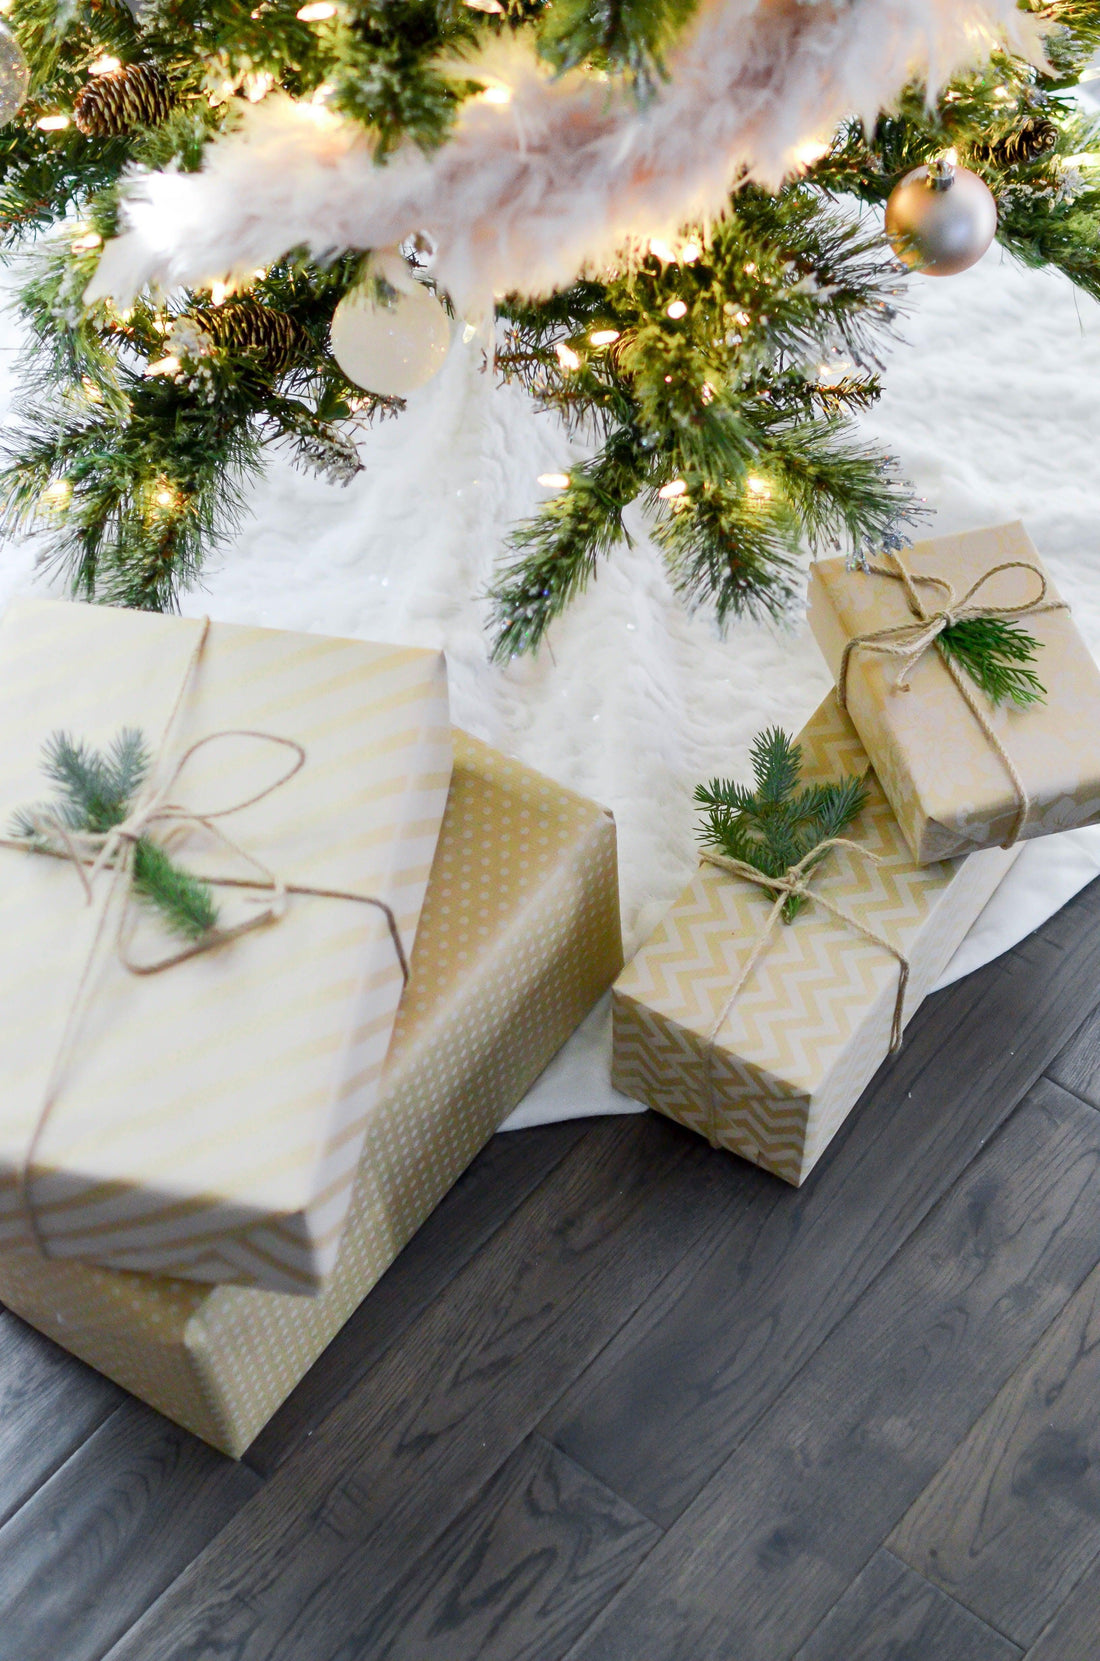 The Most Sustainable Holiday Gift Ideas